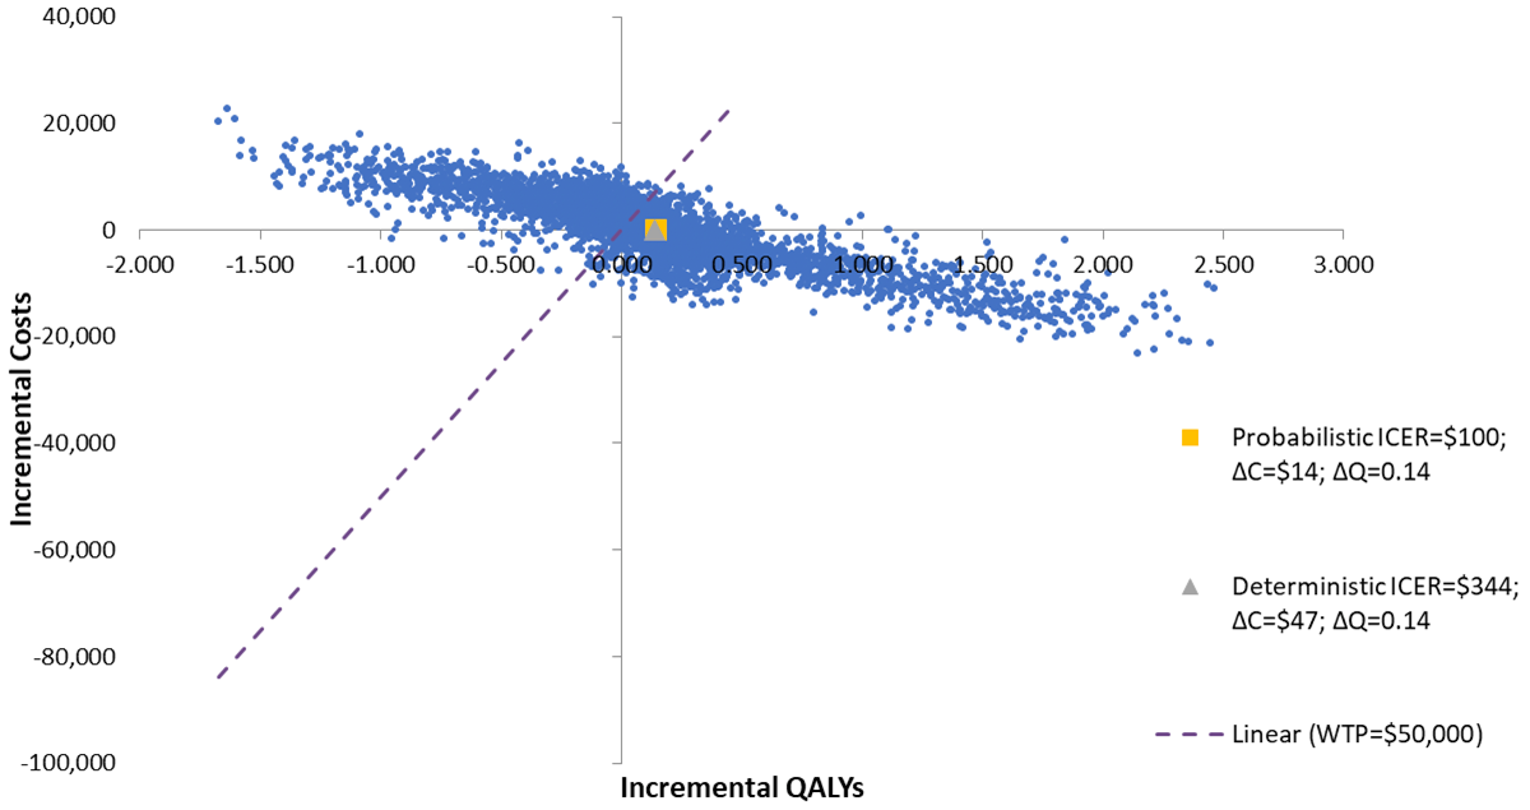 Scatterplot graphing the mean incremental cost and QALYs of each probabilistic iterations. Approximately 30% of iterations are in the quadrant that colchicine + SOC is more costly and lese effective.